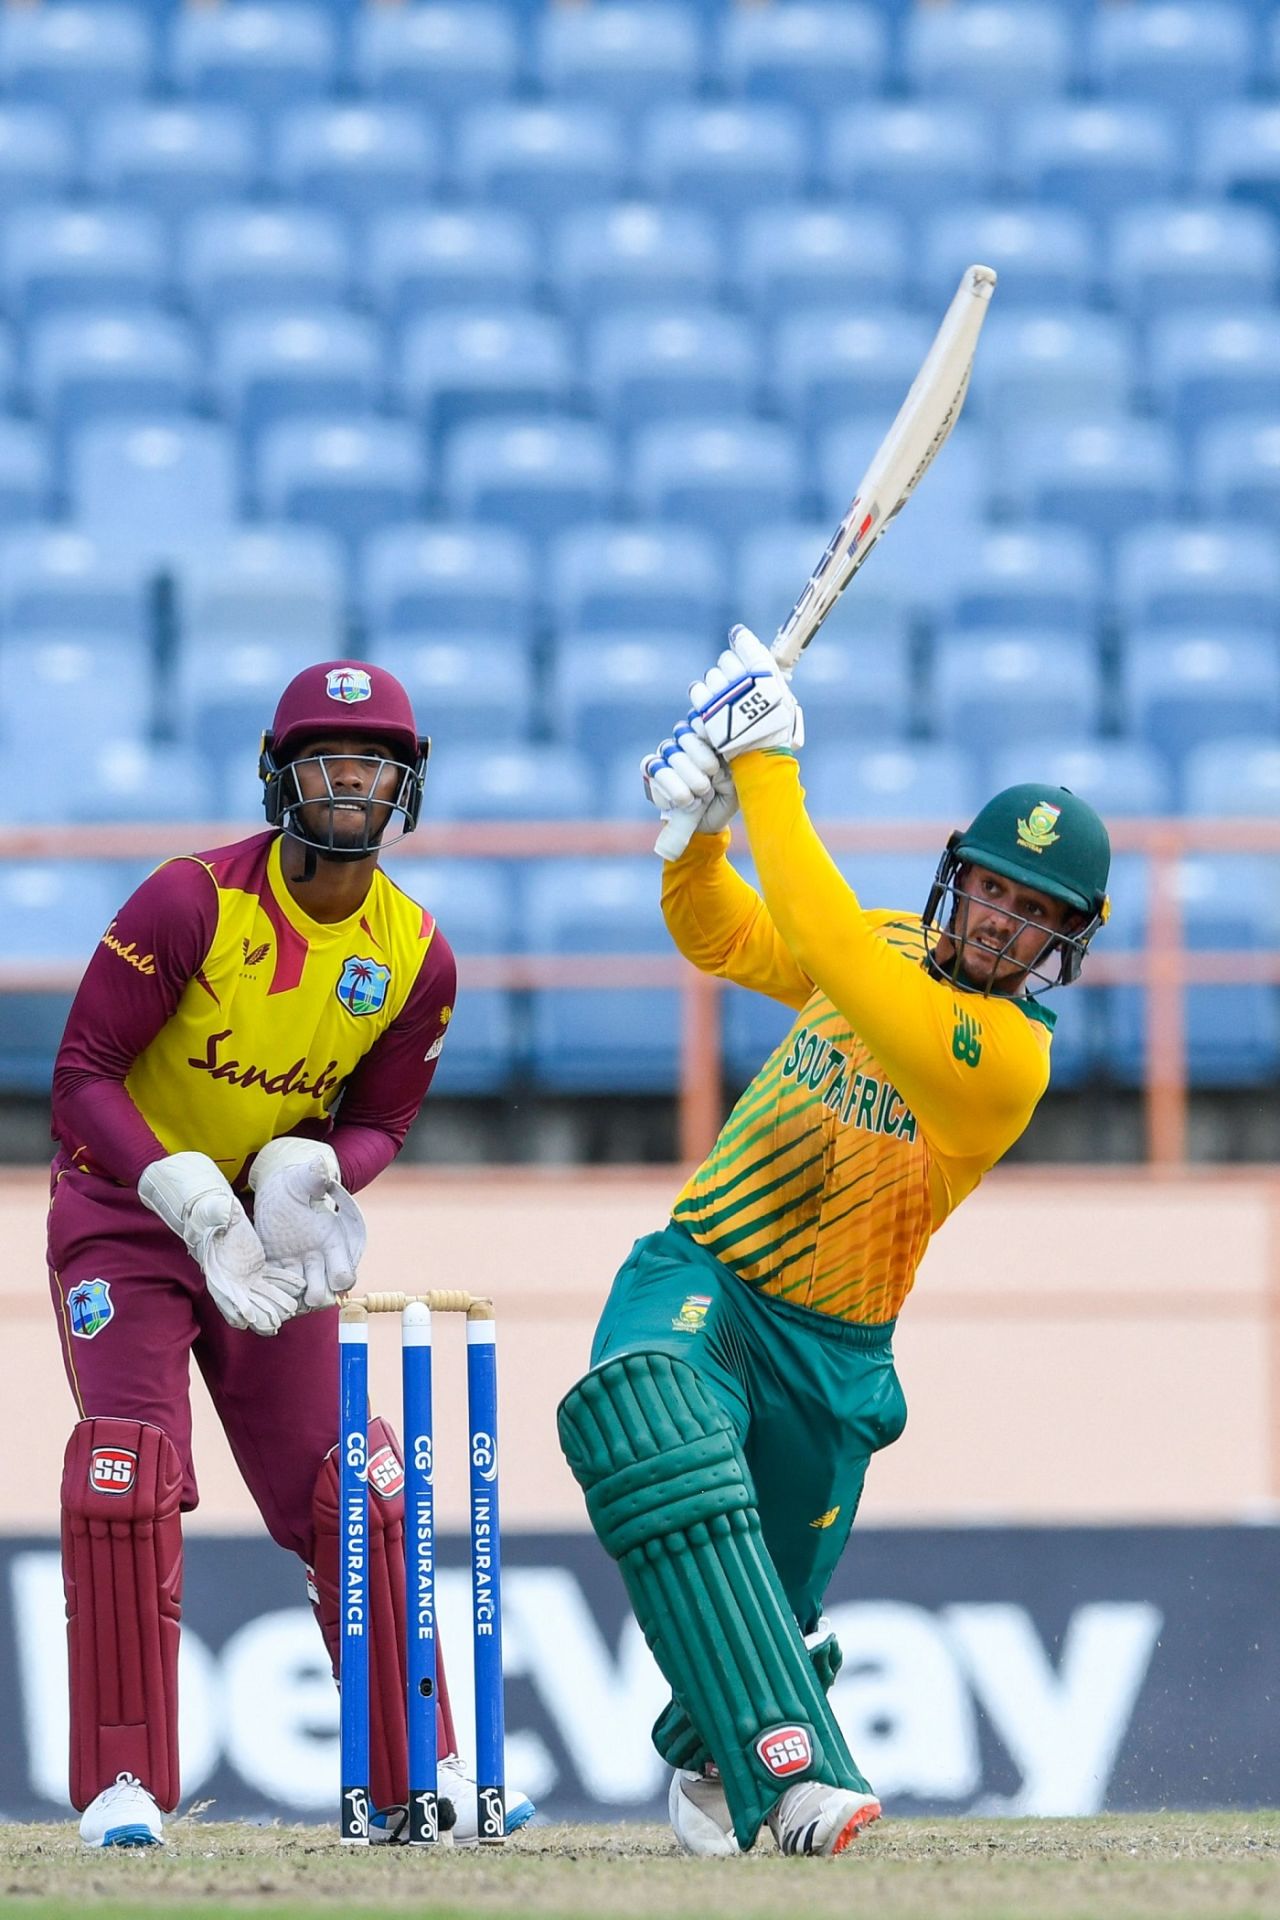 Quinton de Kock slogs one away to the on side, West Indies vs South Africa, 5th T20I, St George's, July 3, 2021